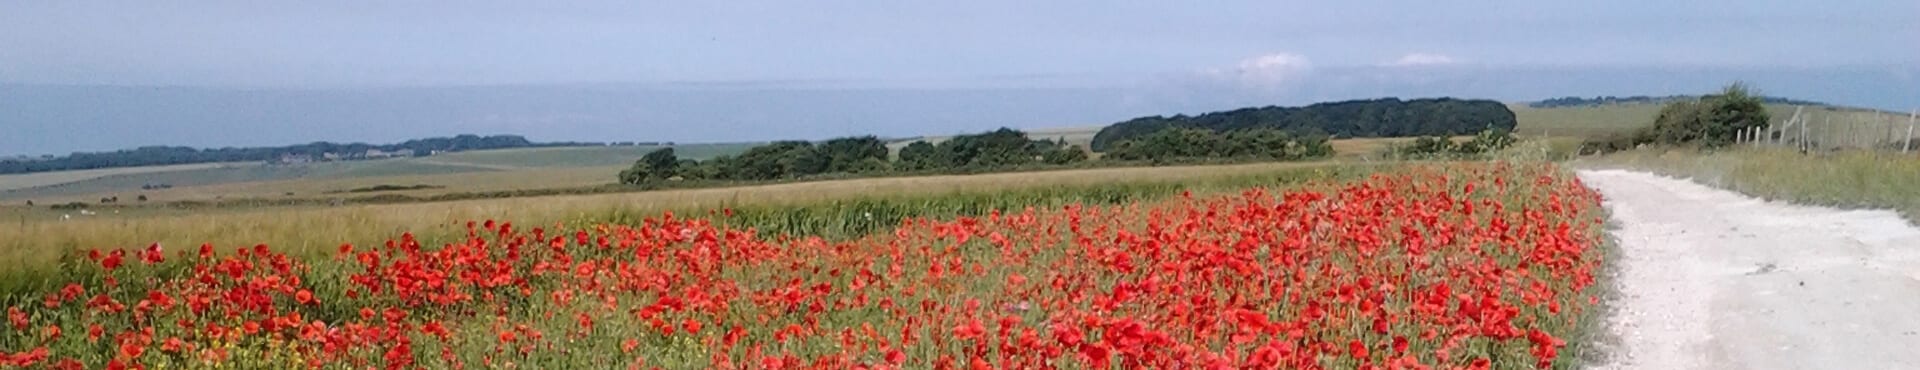 Poppy's on the South Downs Way